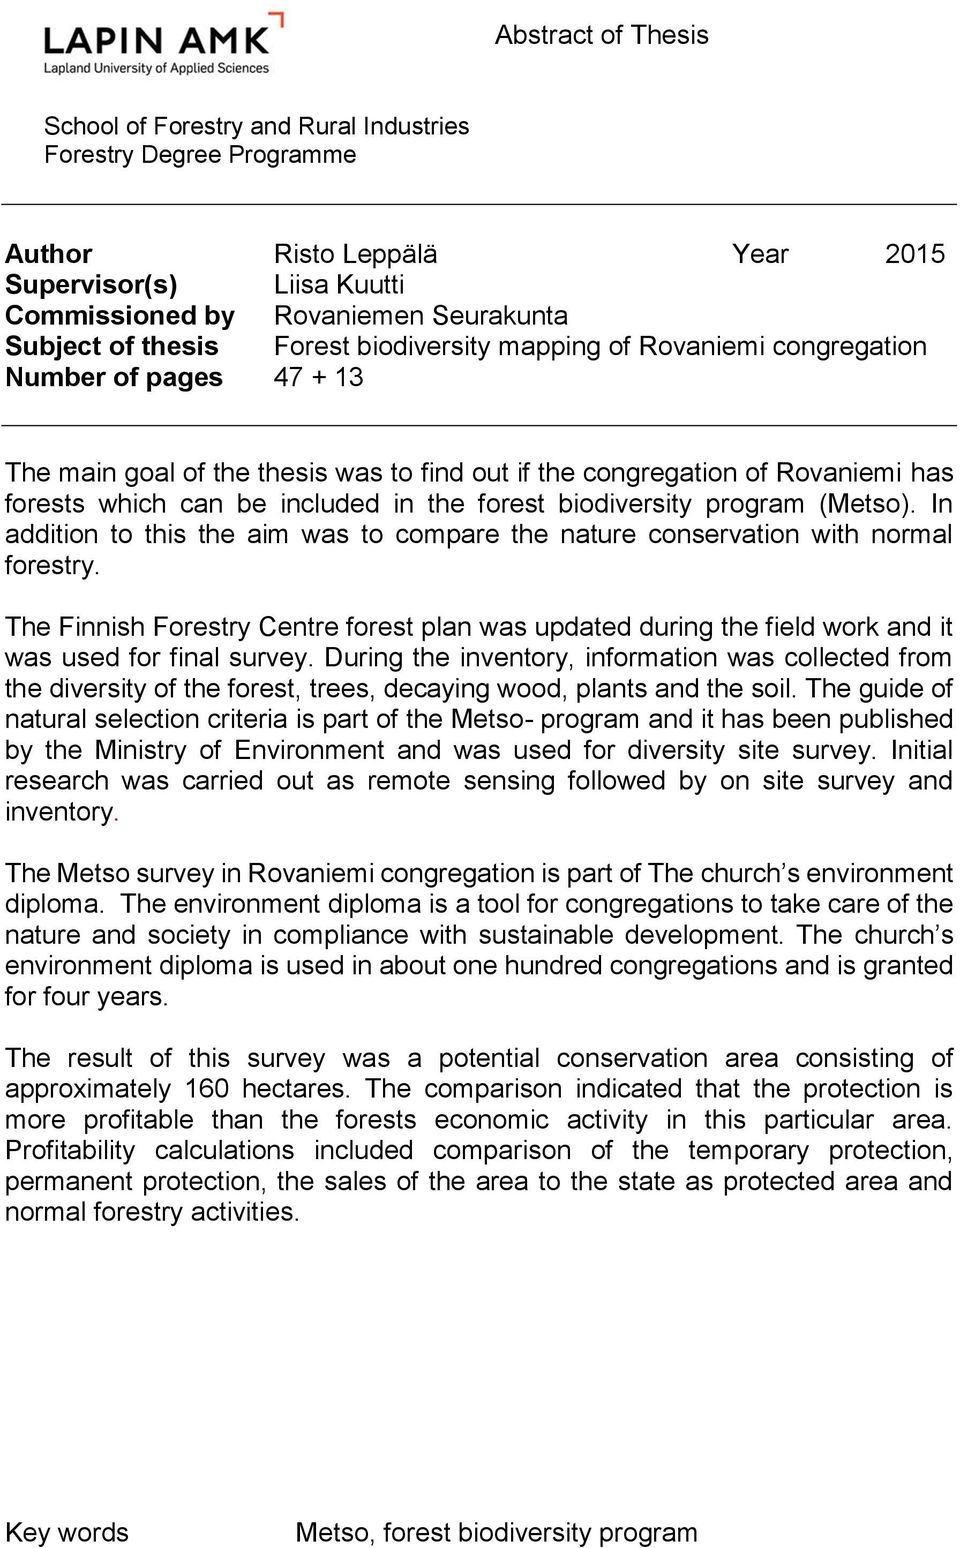 forest biodiversity program (Metso). In addition to this the aim was to compare the nature conservation with normal forestry.